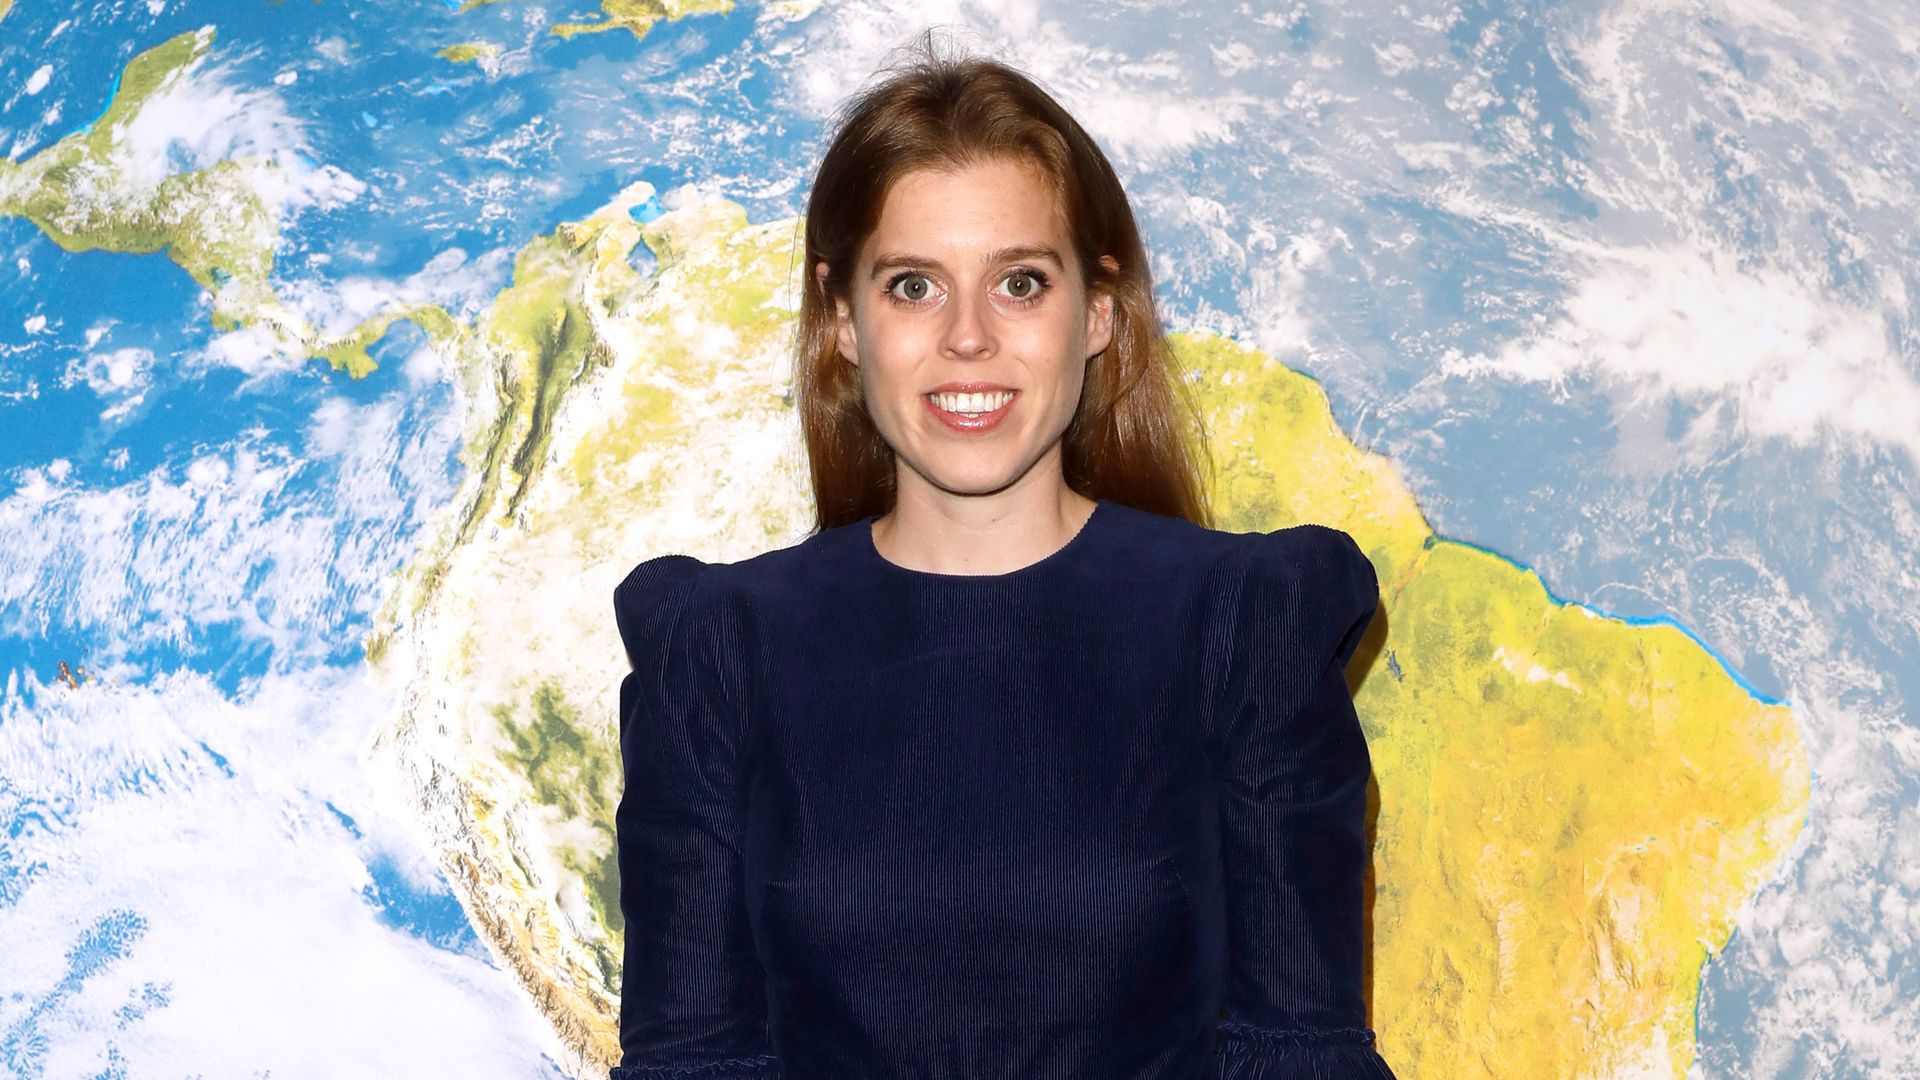 Princess Beatrice wears chic navy dress by The Vampire's Wife